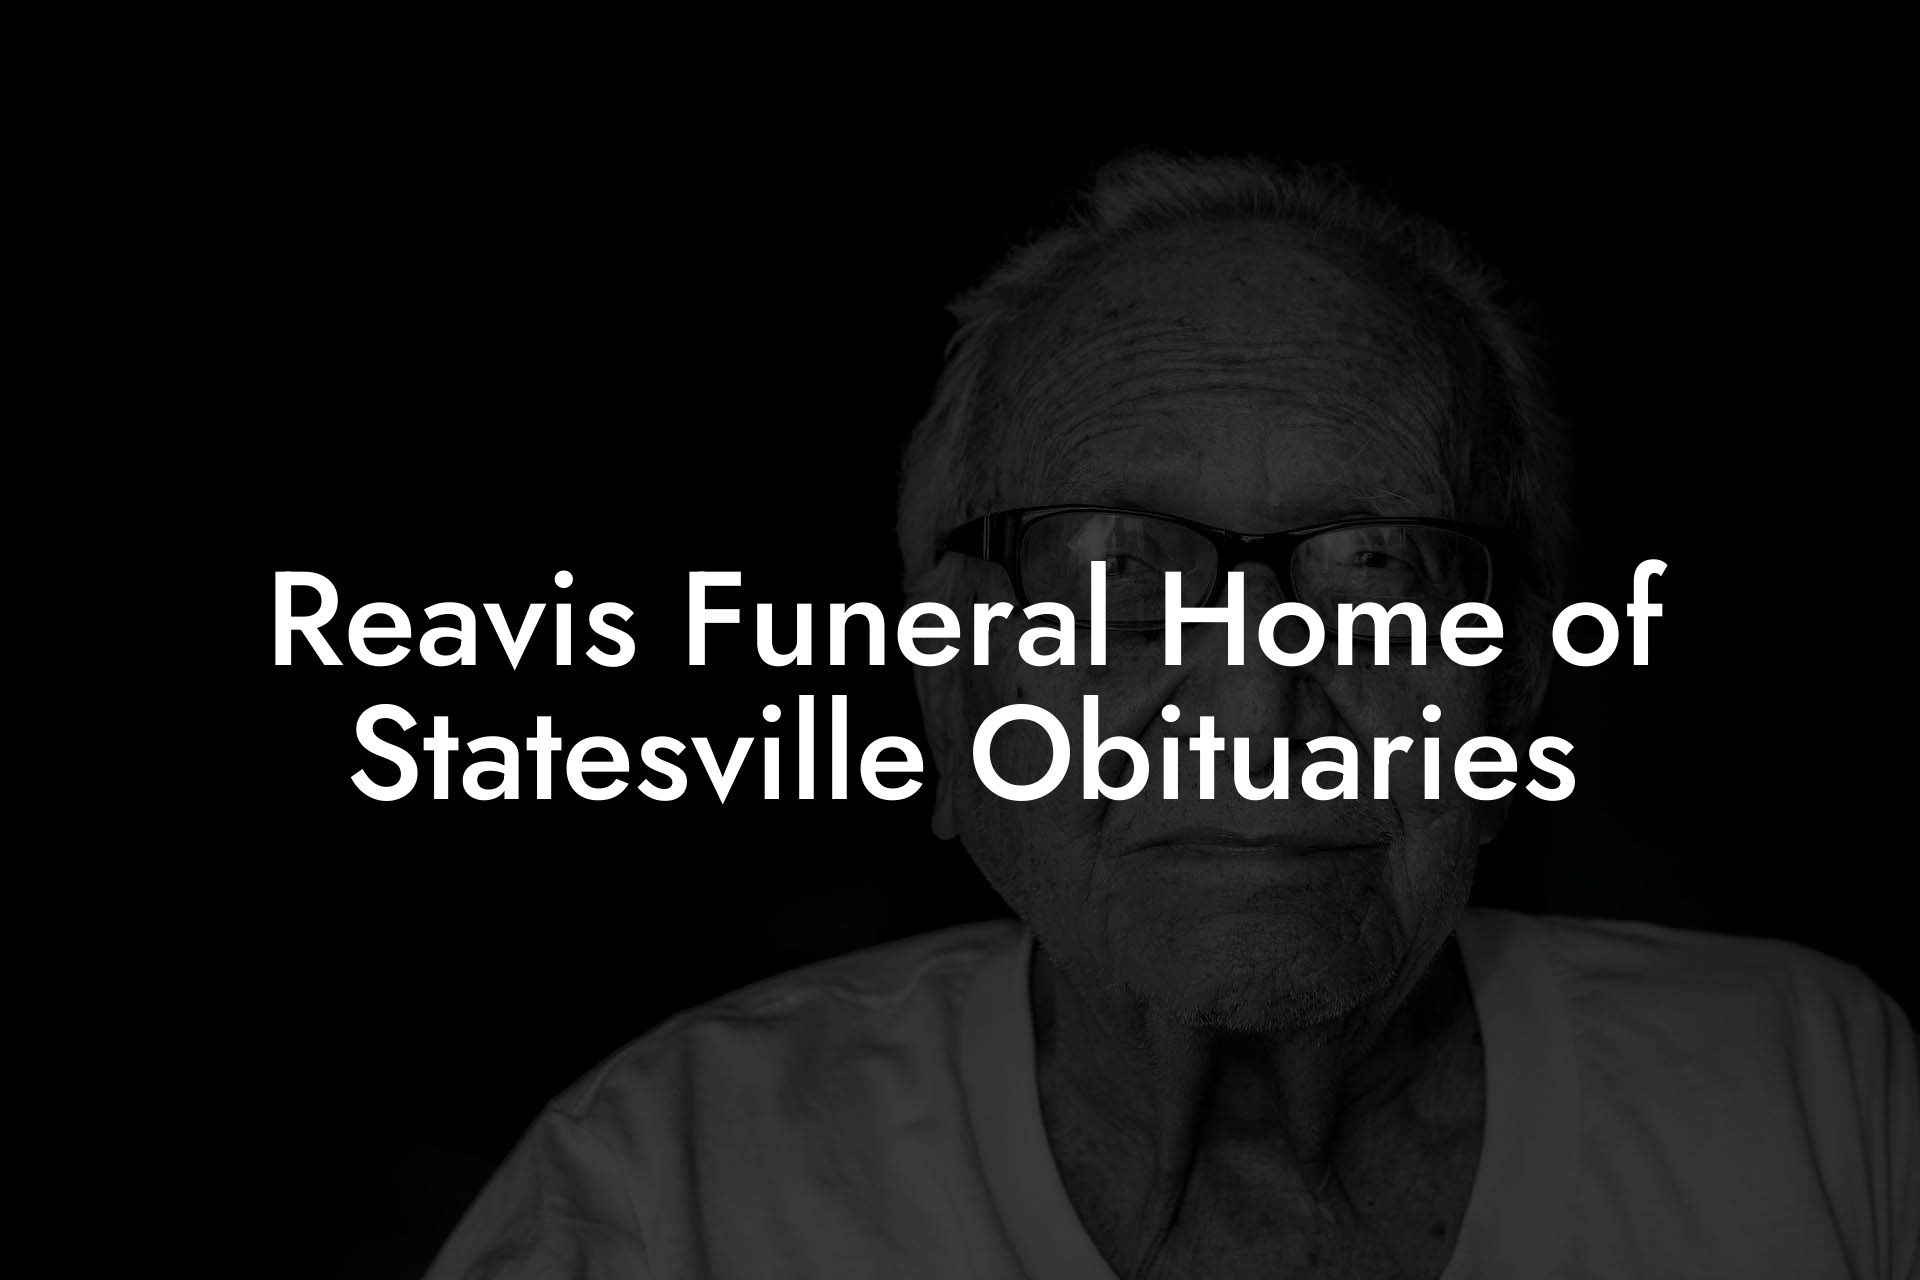 Reavis Funeral Home of Statesville Obituaries